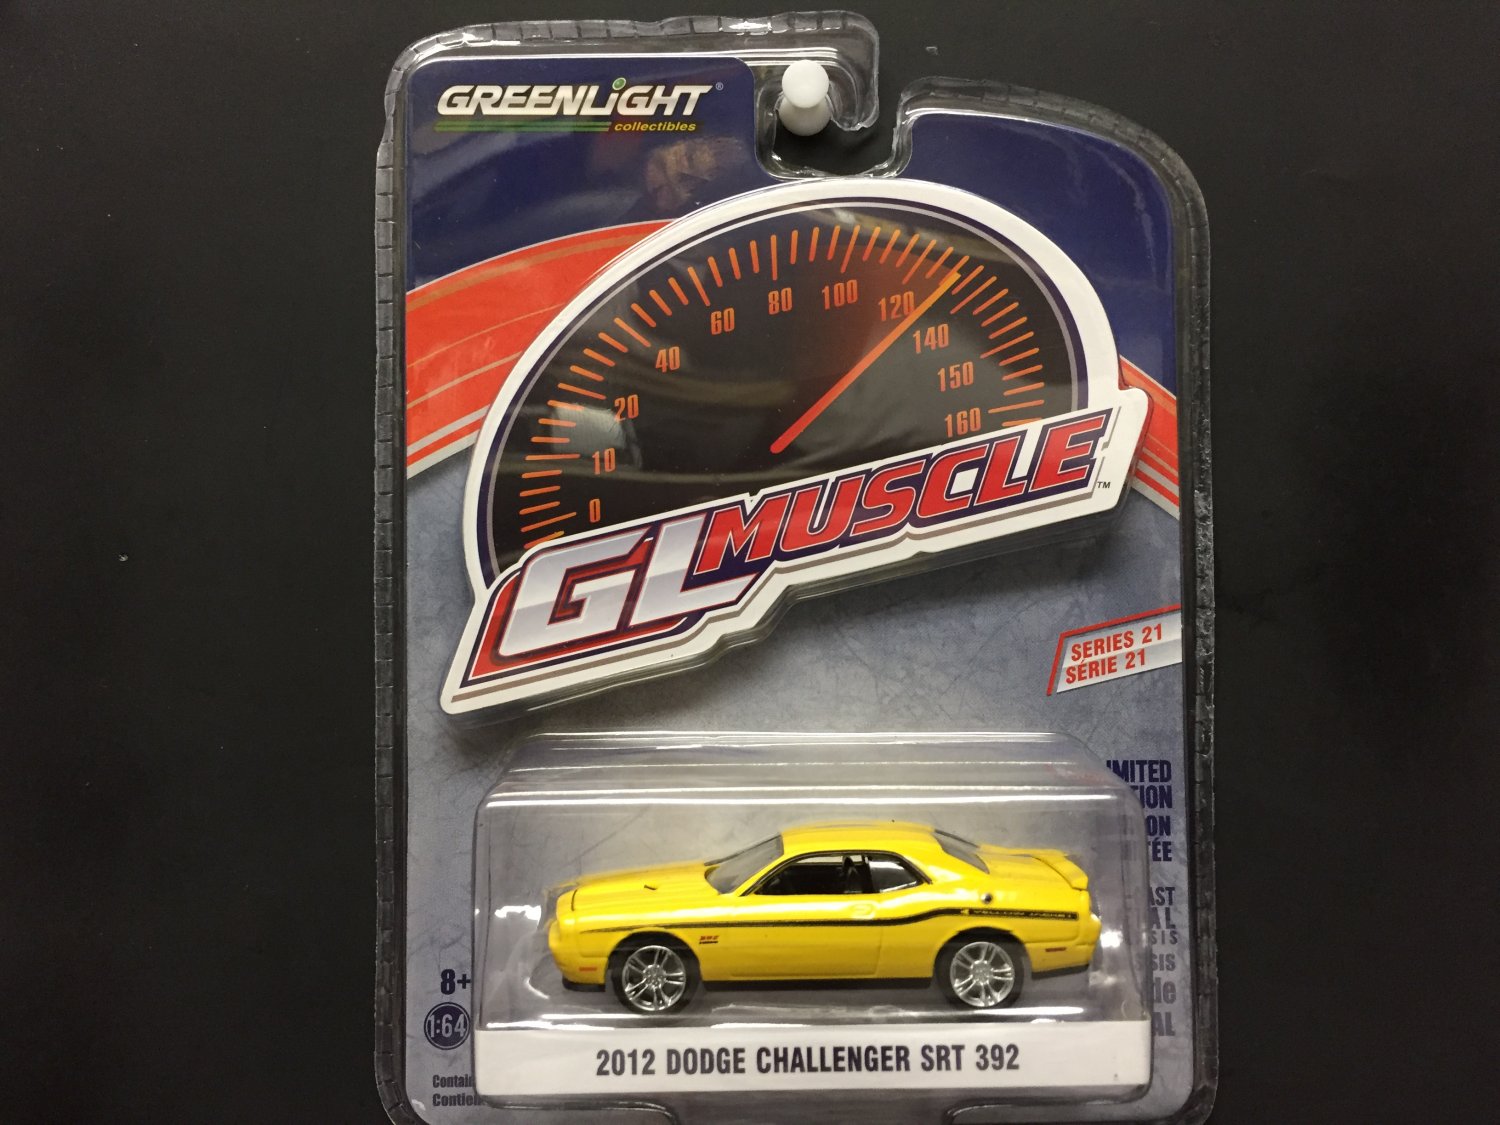 GreenLight Muscle Series 21 - 2012 Dodge Challenger Yellow Jacket - Stinger Yellow 13230-D